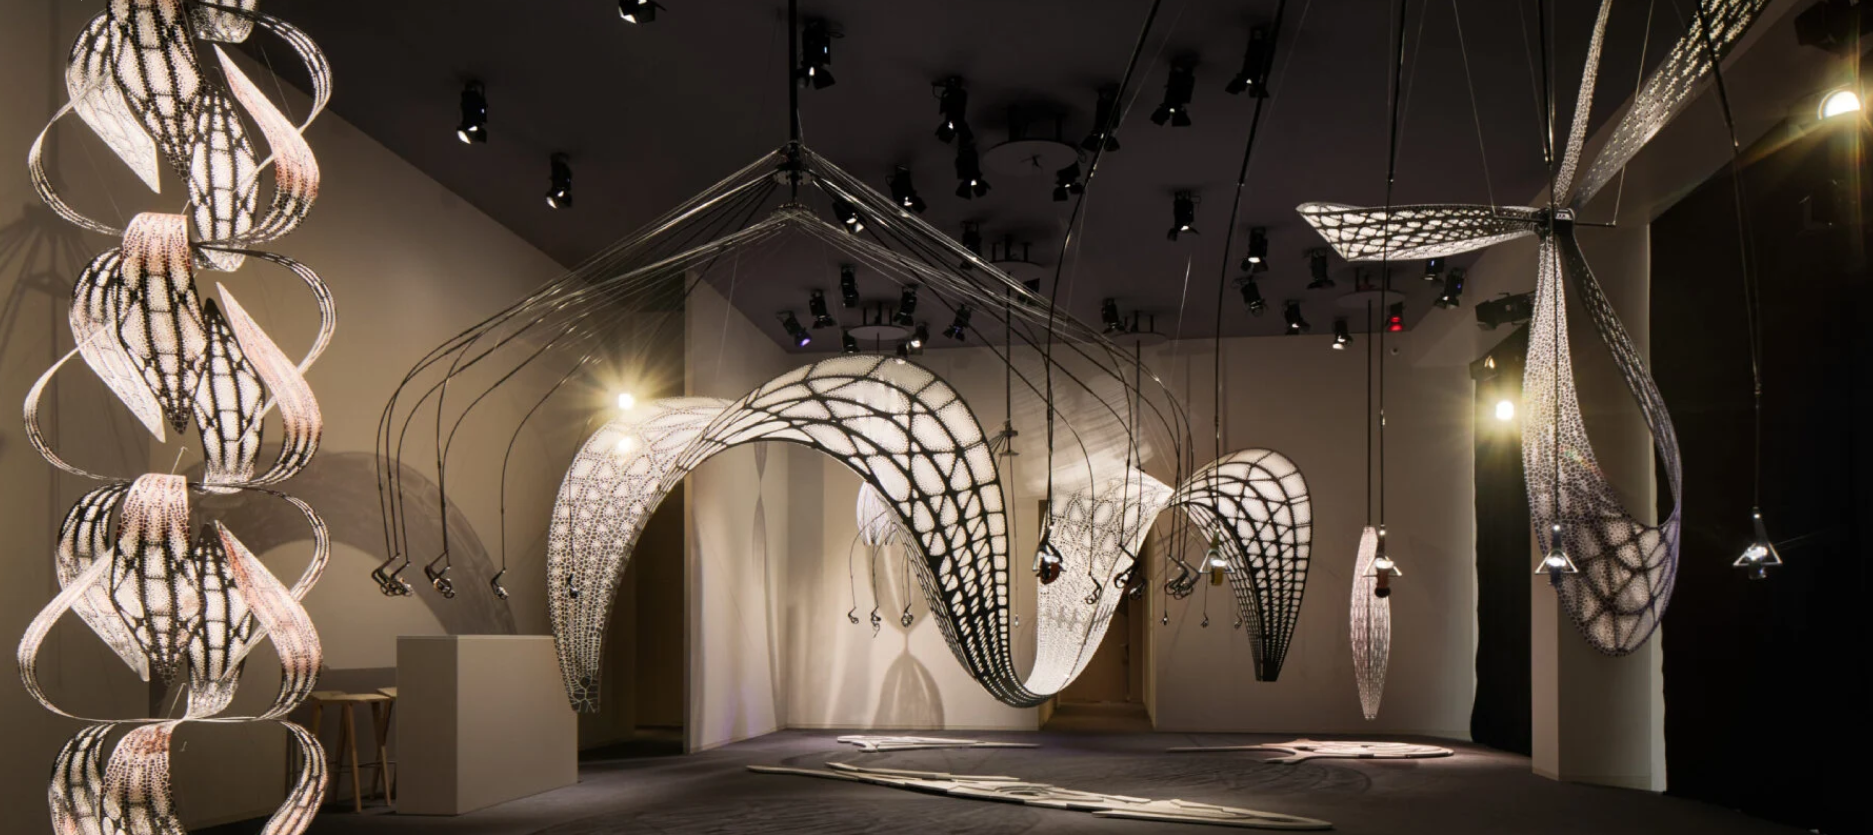 The details of kinetic sculptures by ClÃ©ment Vieille, photo by DesignBoom